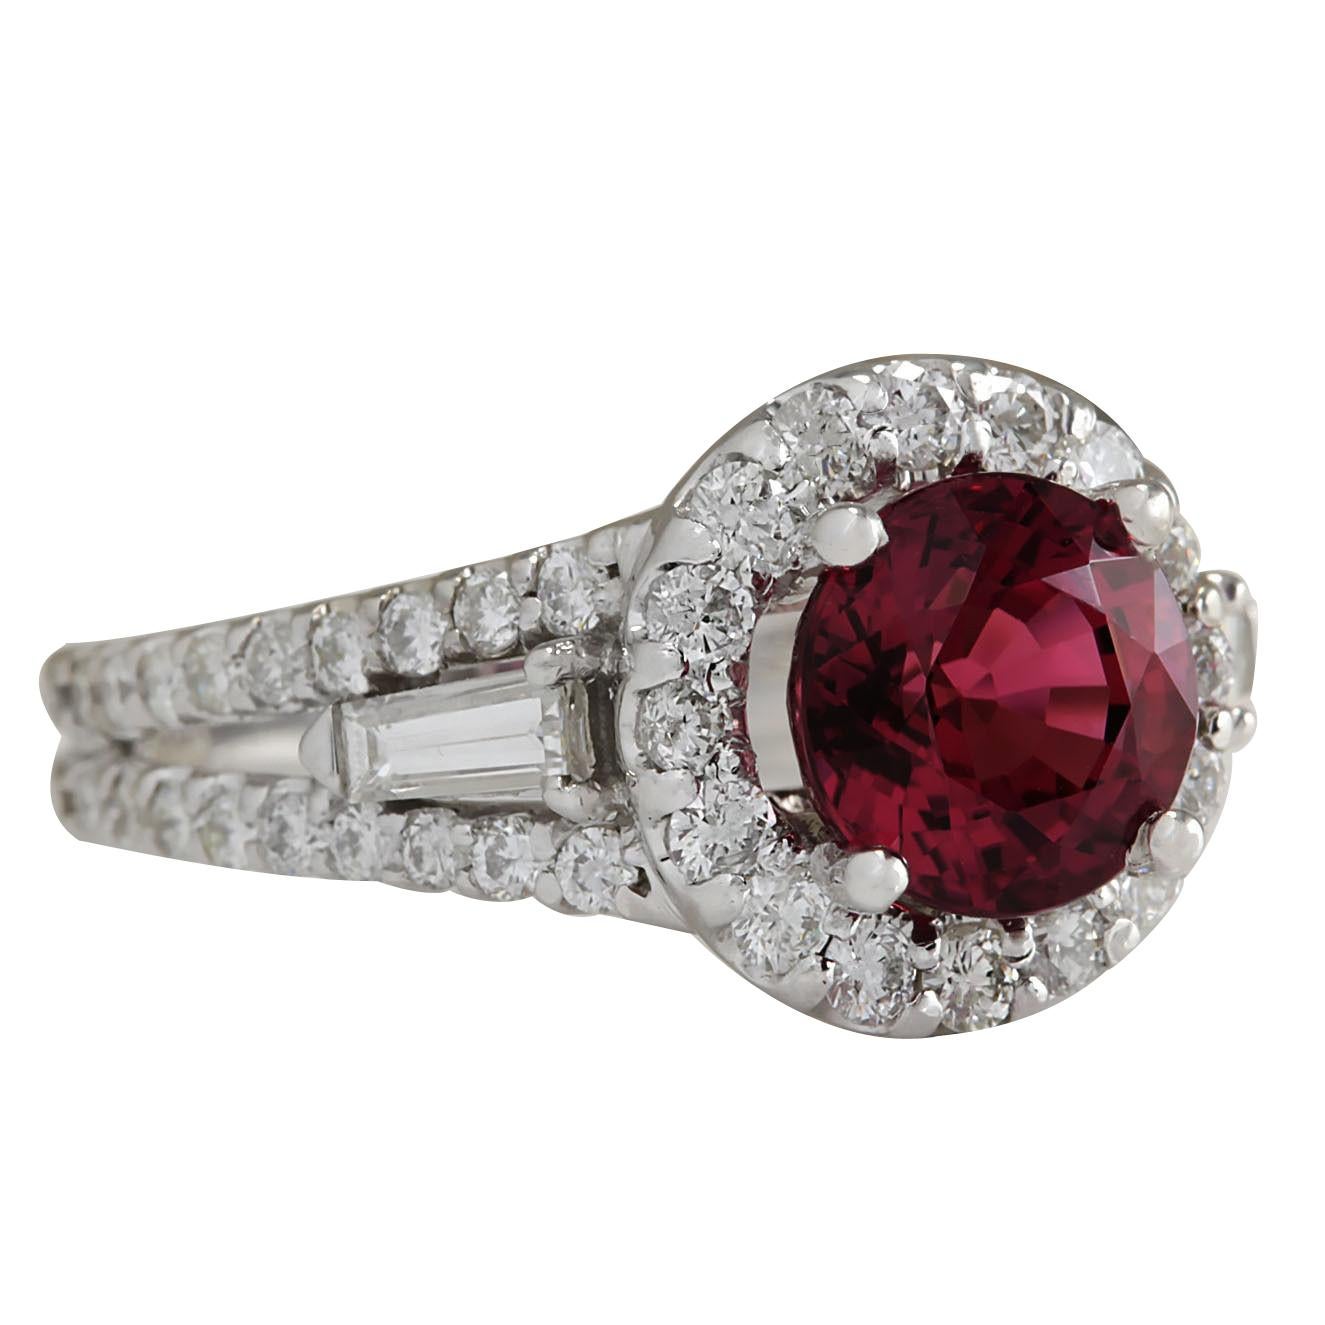 Stamped: 14K White Gold
Total Ring Weight: 7.0 Grams
Total Natural Tourmaline Weight is 2.78 Carat (Measures: 8.00x8.00 mm)
Color: Pink
Total Natural Diamond Weight is 1.24 Carat
Color: F-G, Clarity: VS2-SI1
Face Measures: 12.00x12.00 mm
Sku: